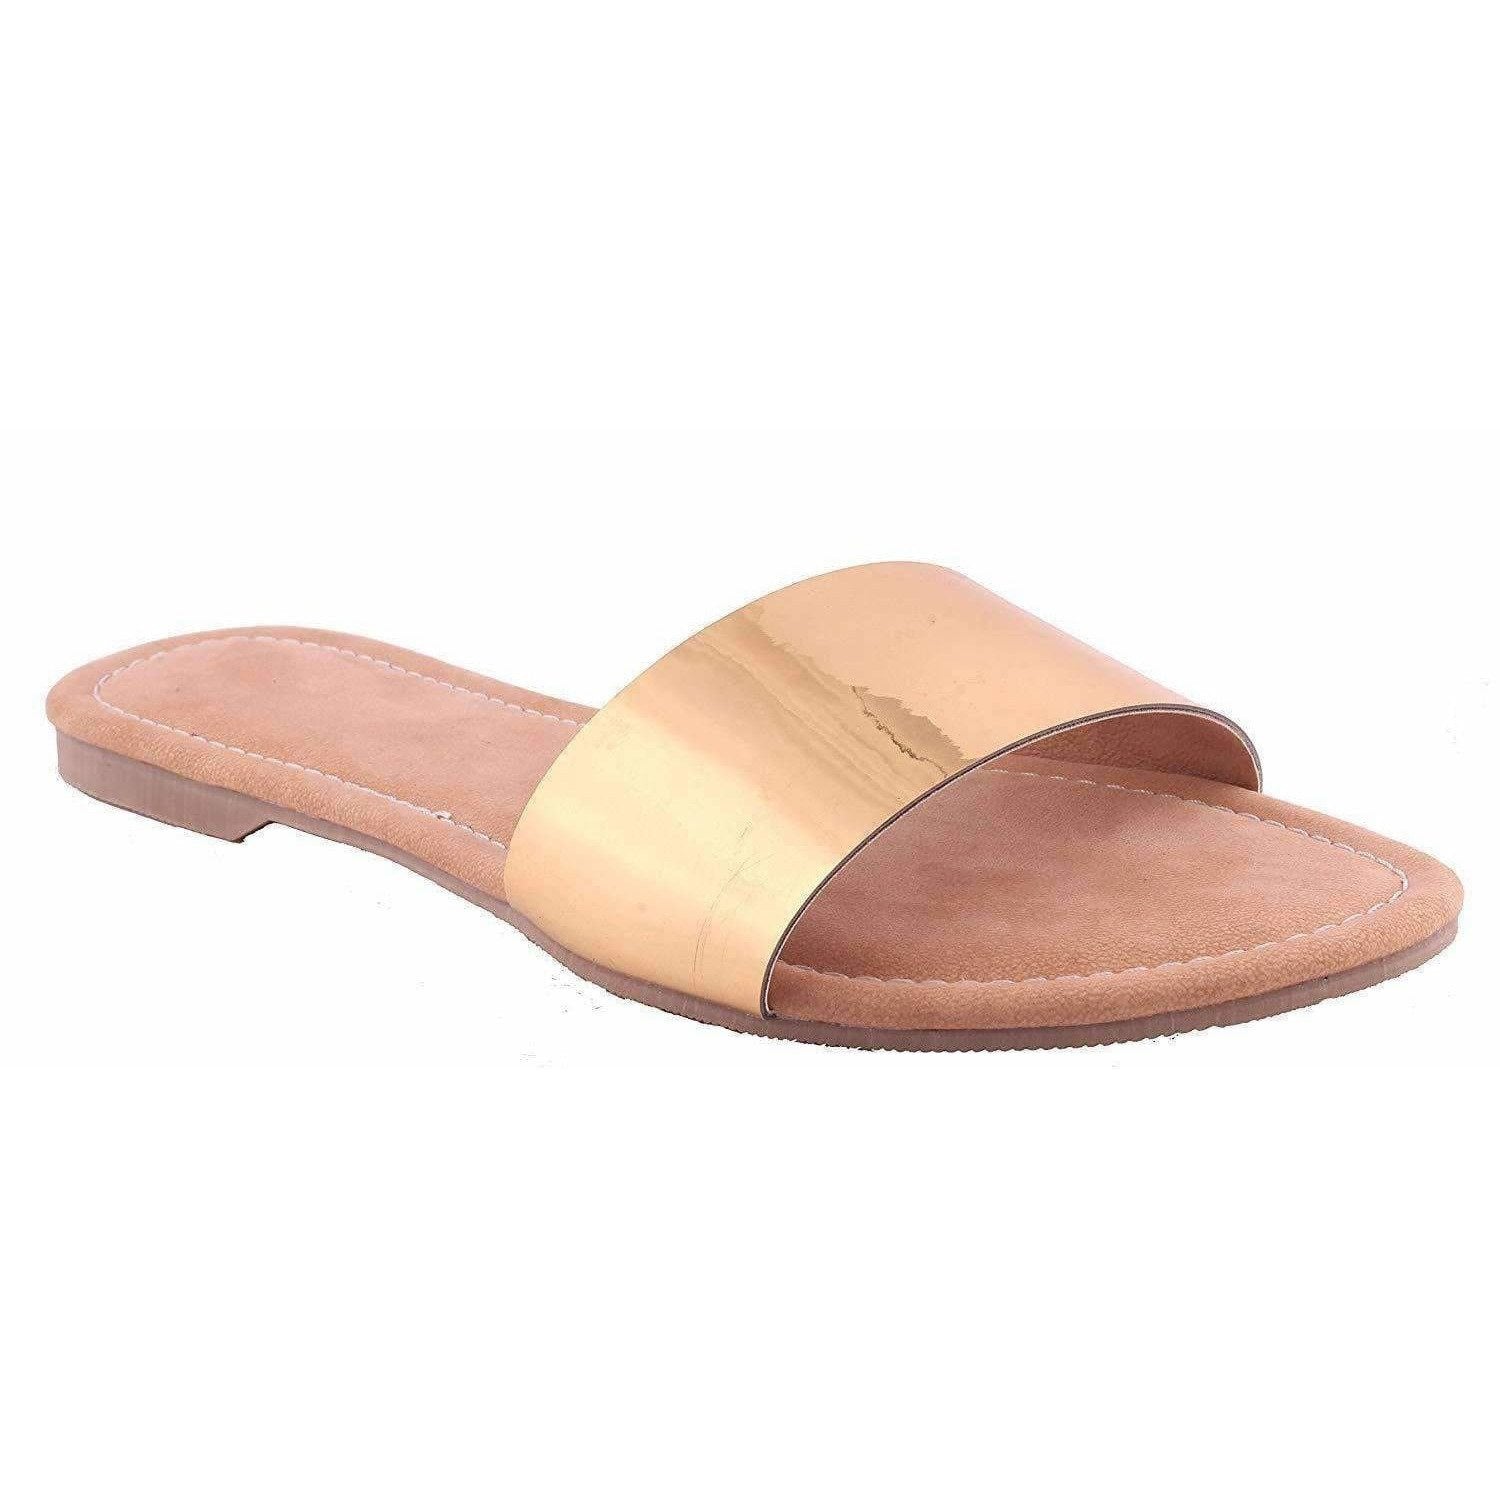 Buy Golden Strap Flats Ladies Slippers Girls Slippers at Best Price | Distacart